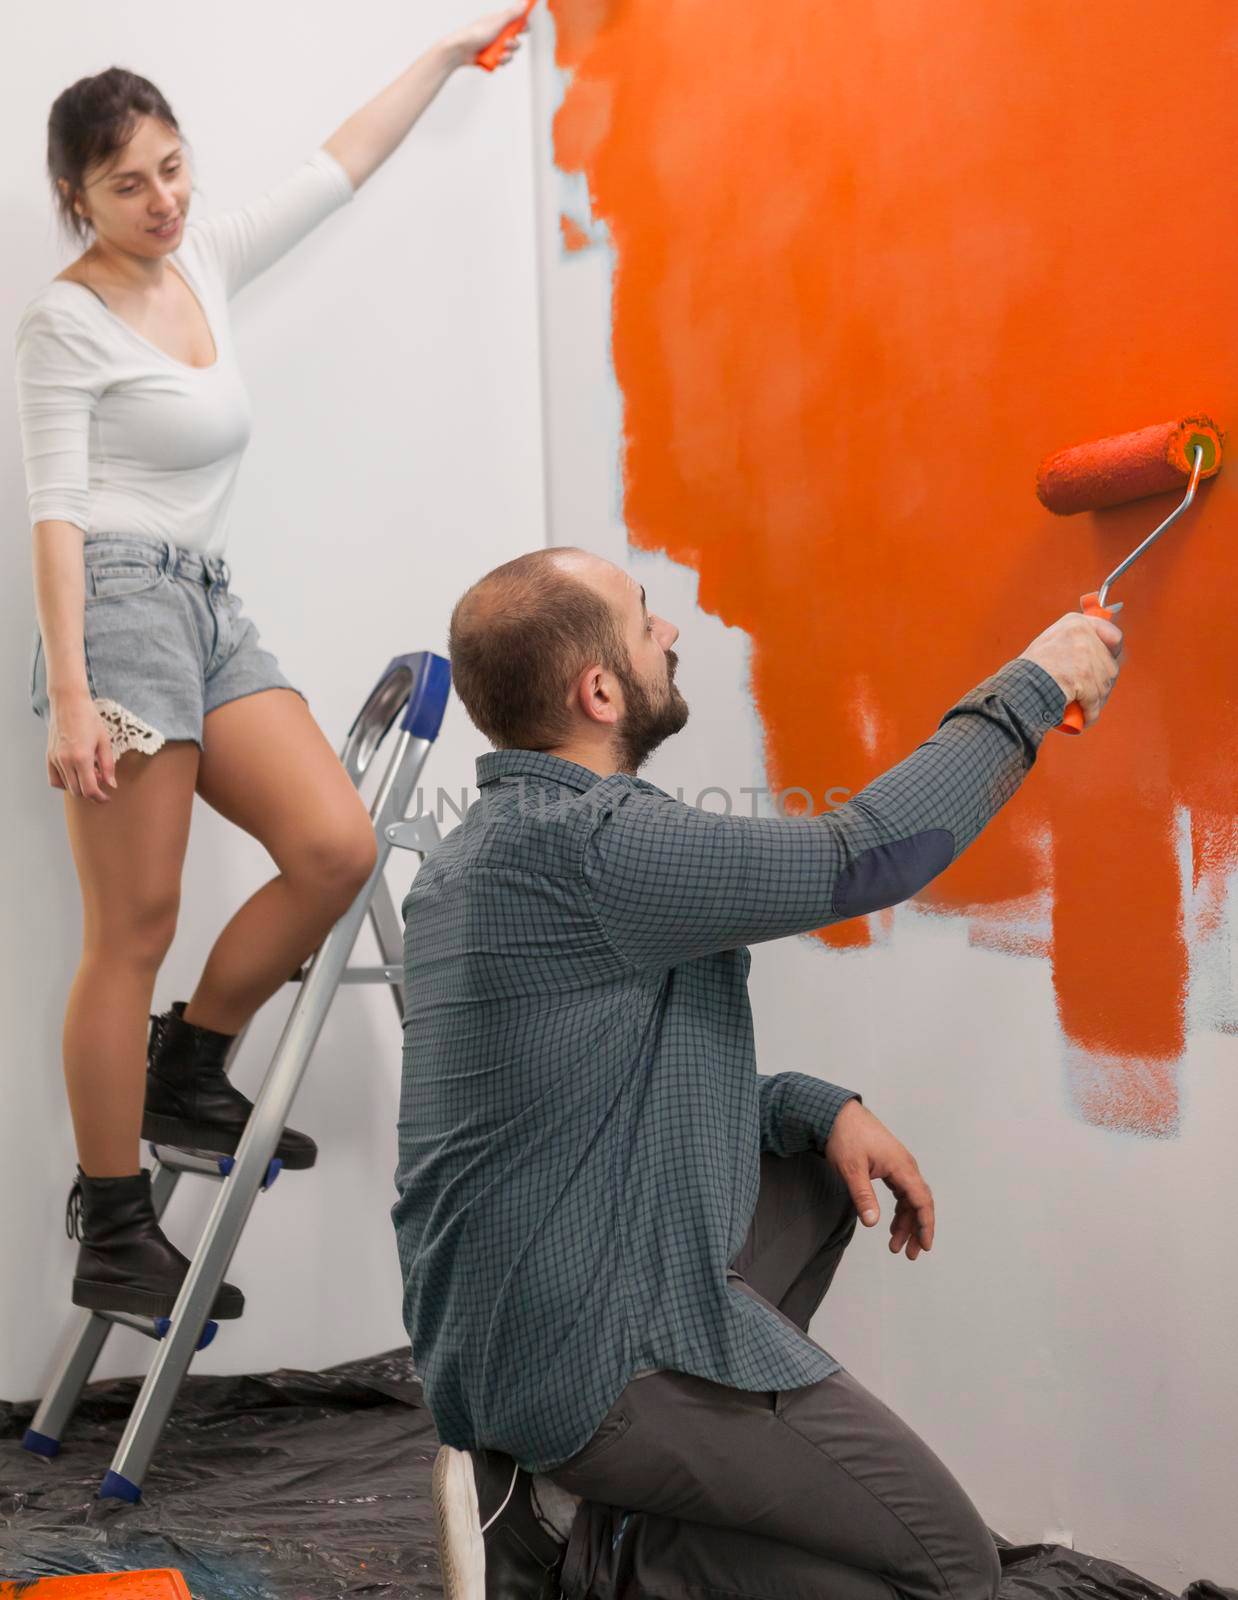 Family using orange paint to renovate apartment walls and change house design, painting with vibrant color using paintbrush, roller and tools. Diy home renovation and decoration.